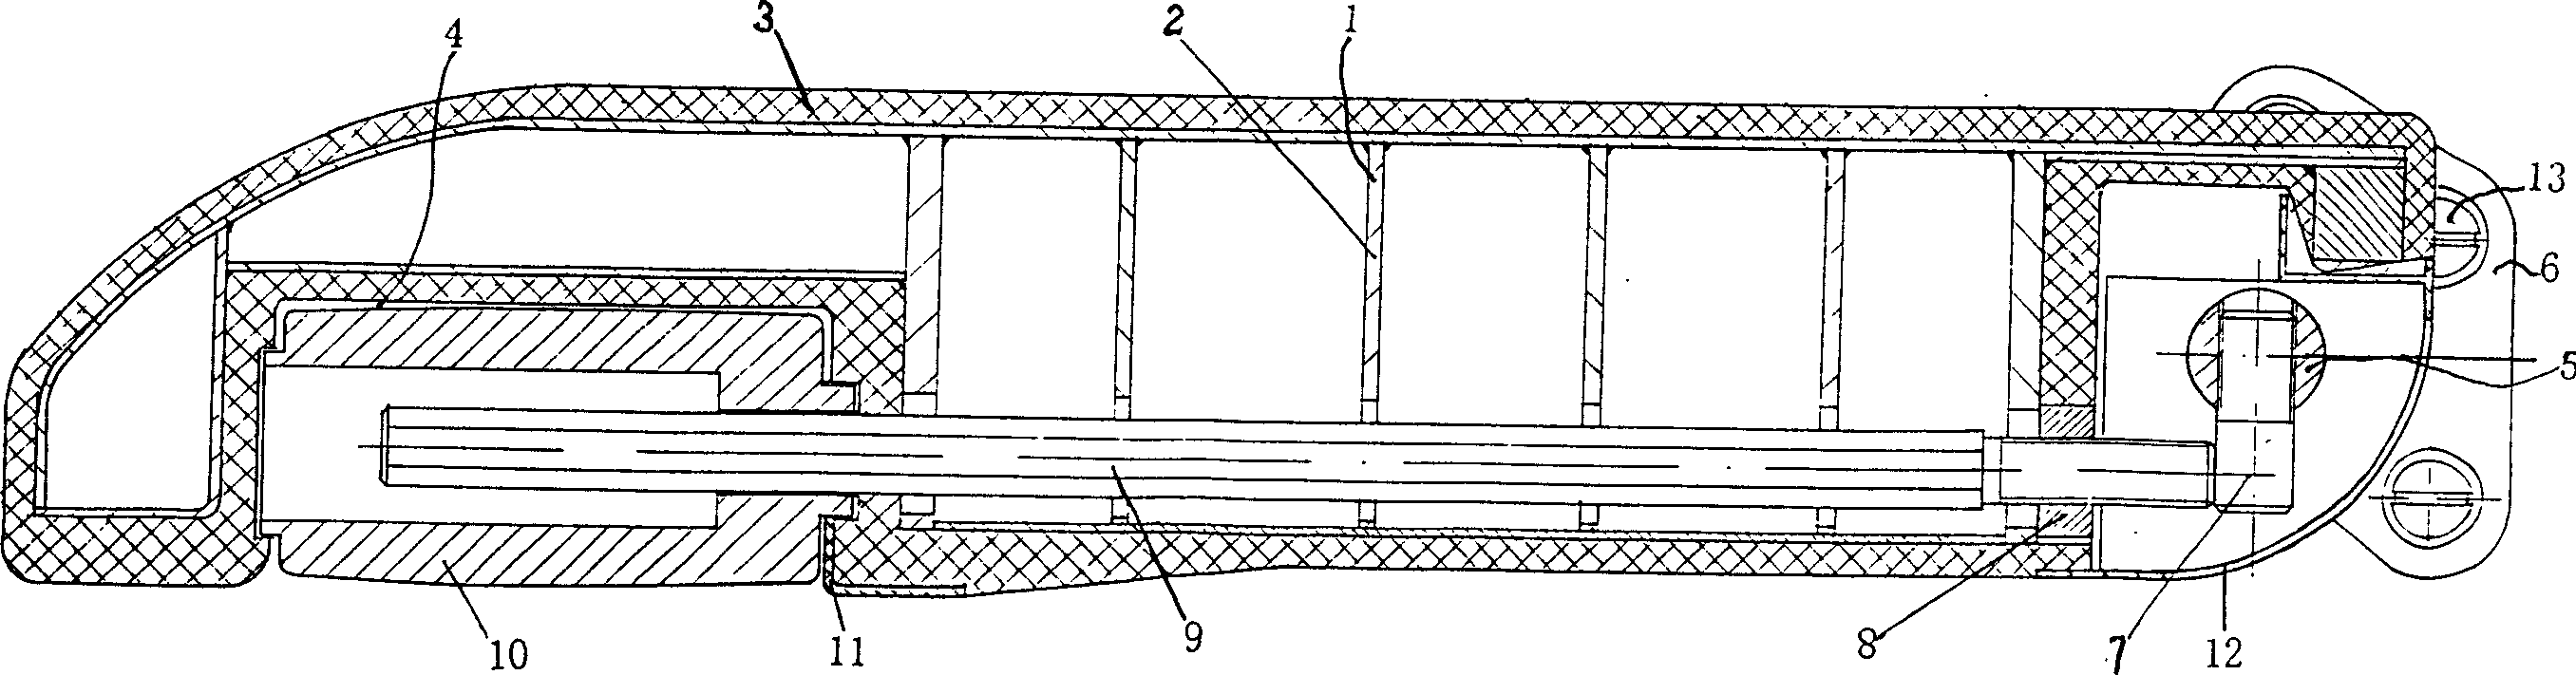 Armrest of seat of locomotive, rehicle driver